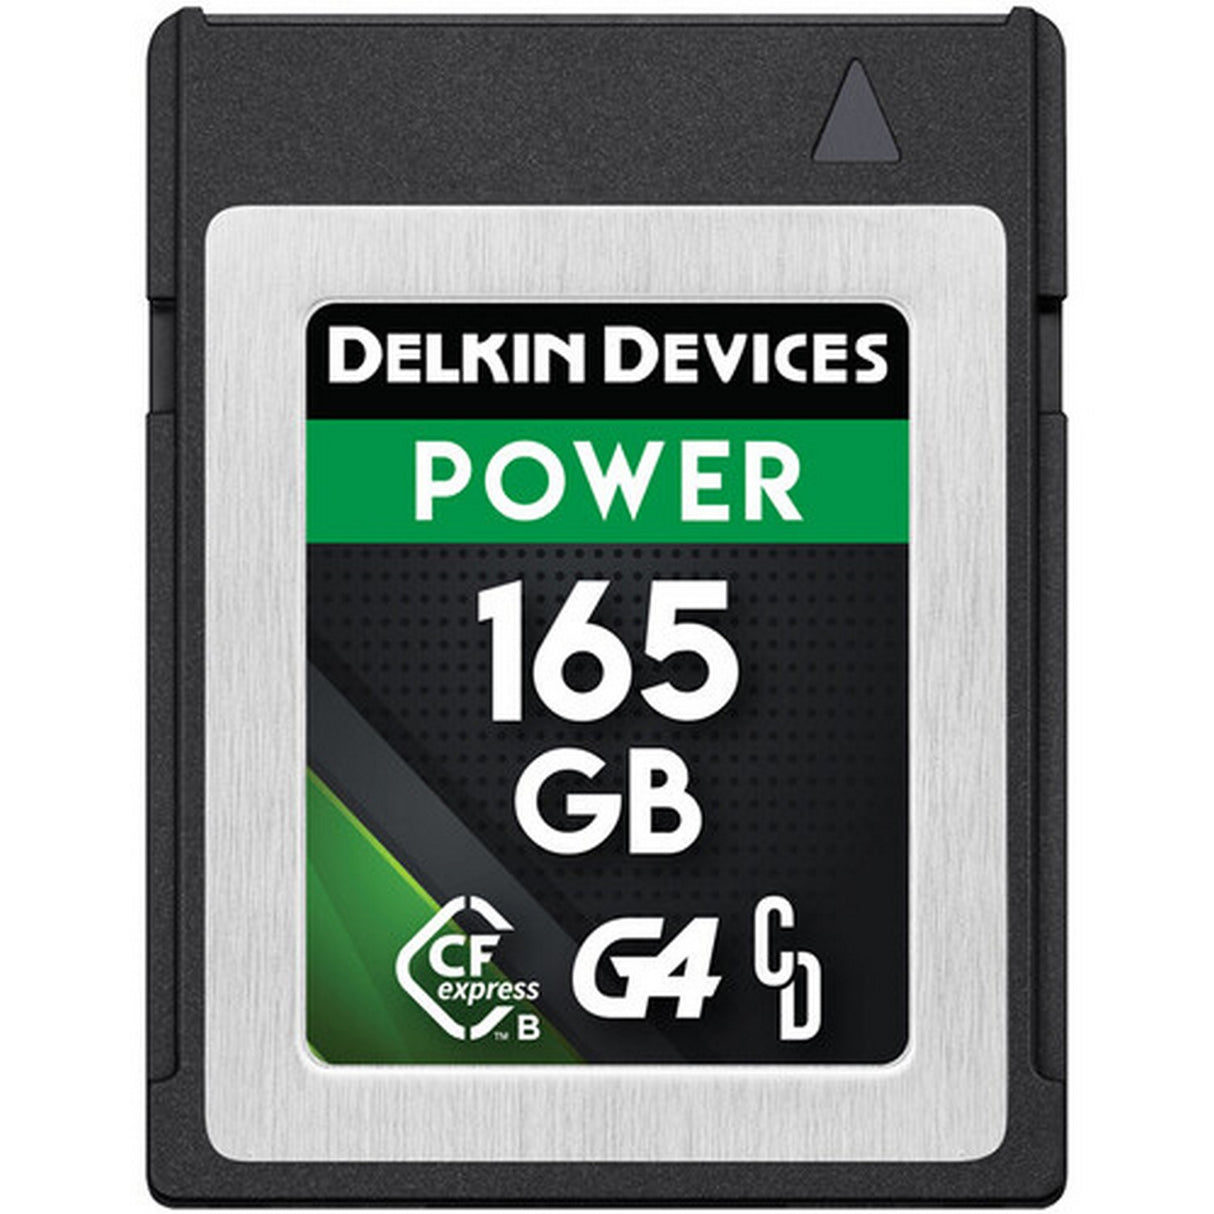 Delkin Devices CFexpresss Power Type B Memory Card, 165GB